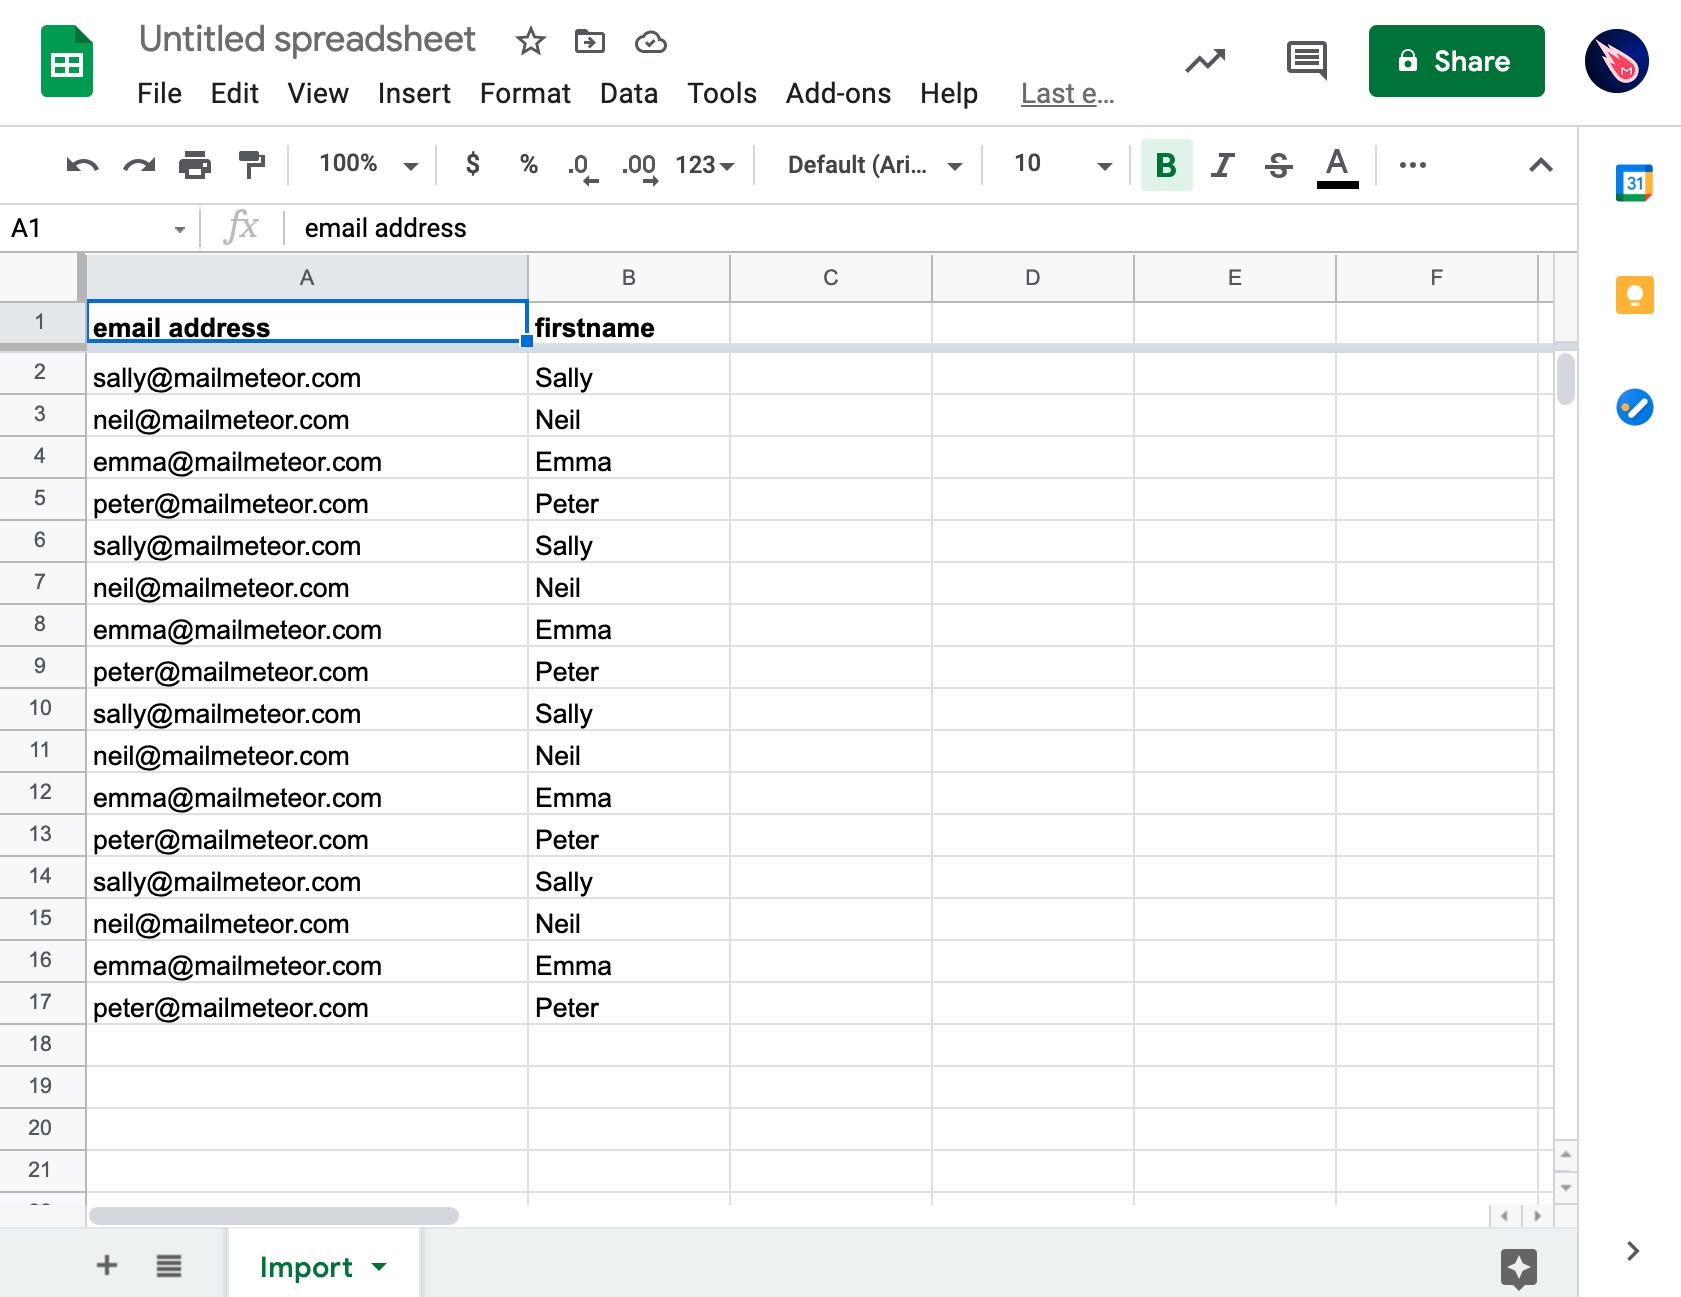 An Excel file imported in Google Sheets